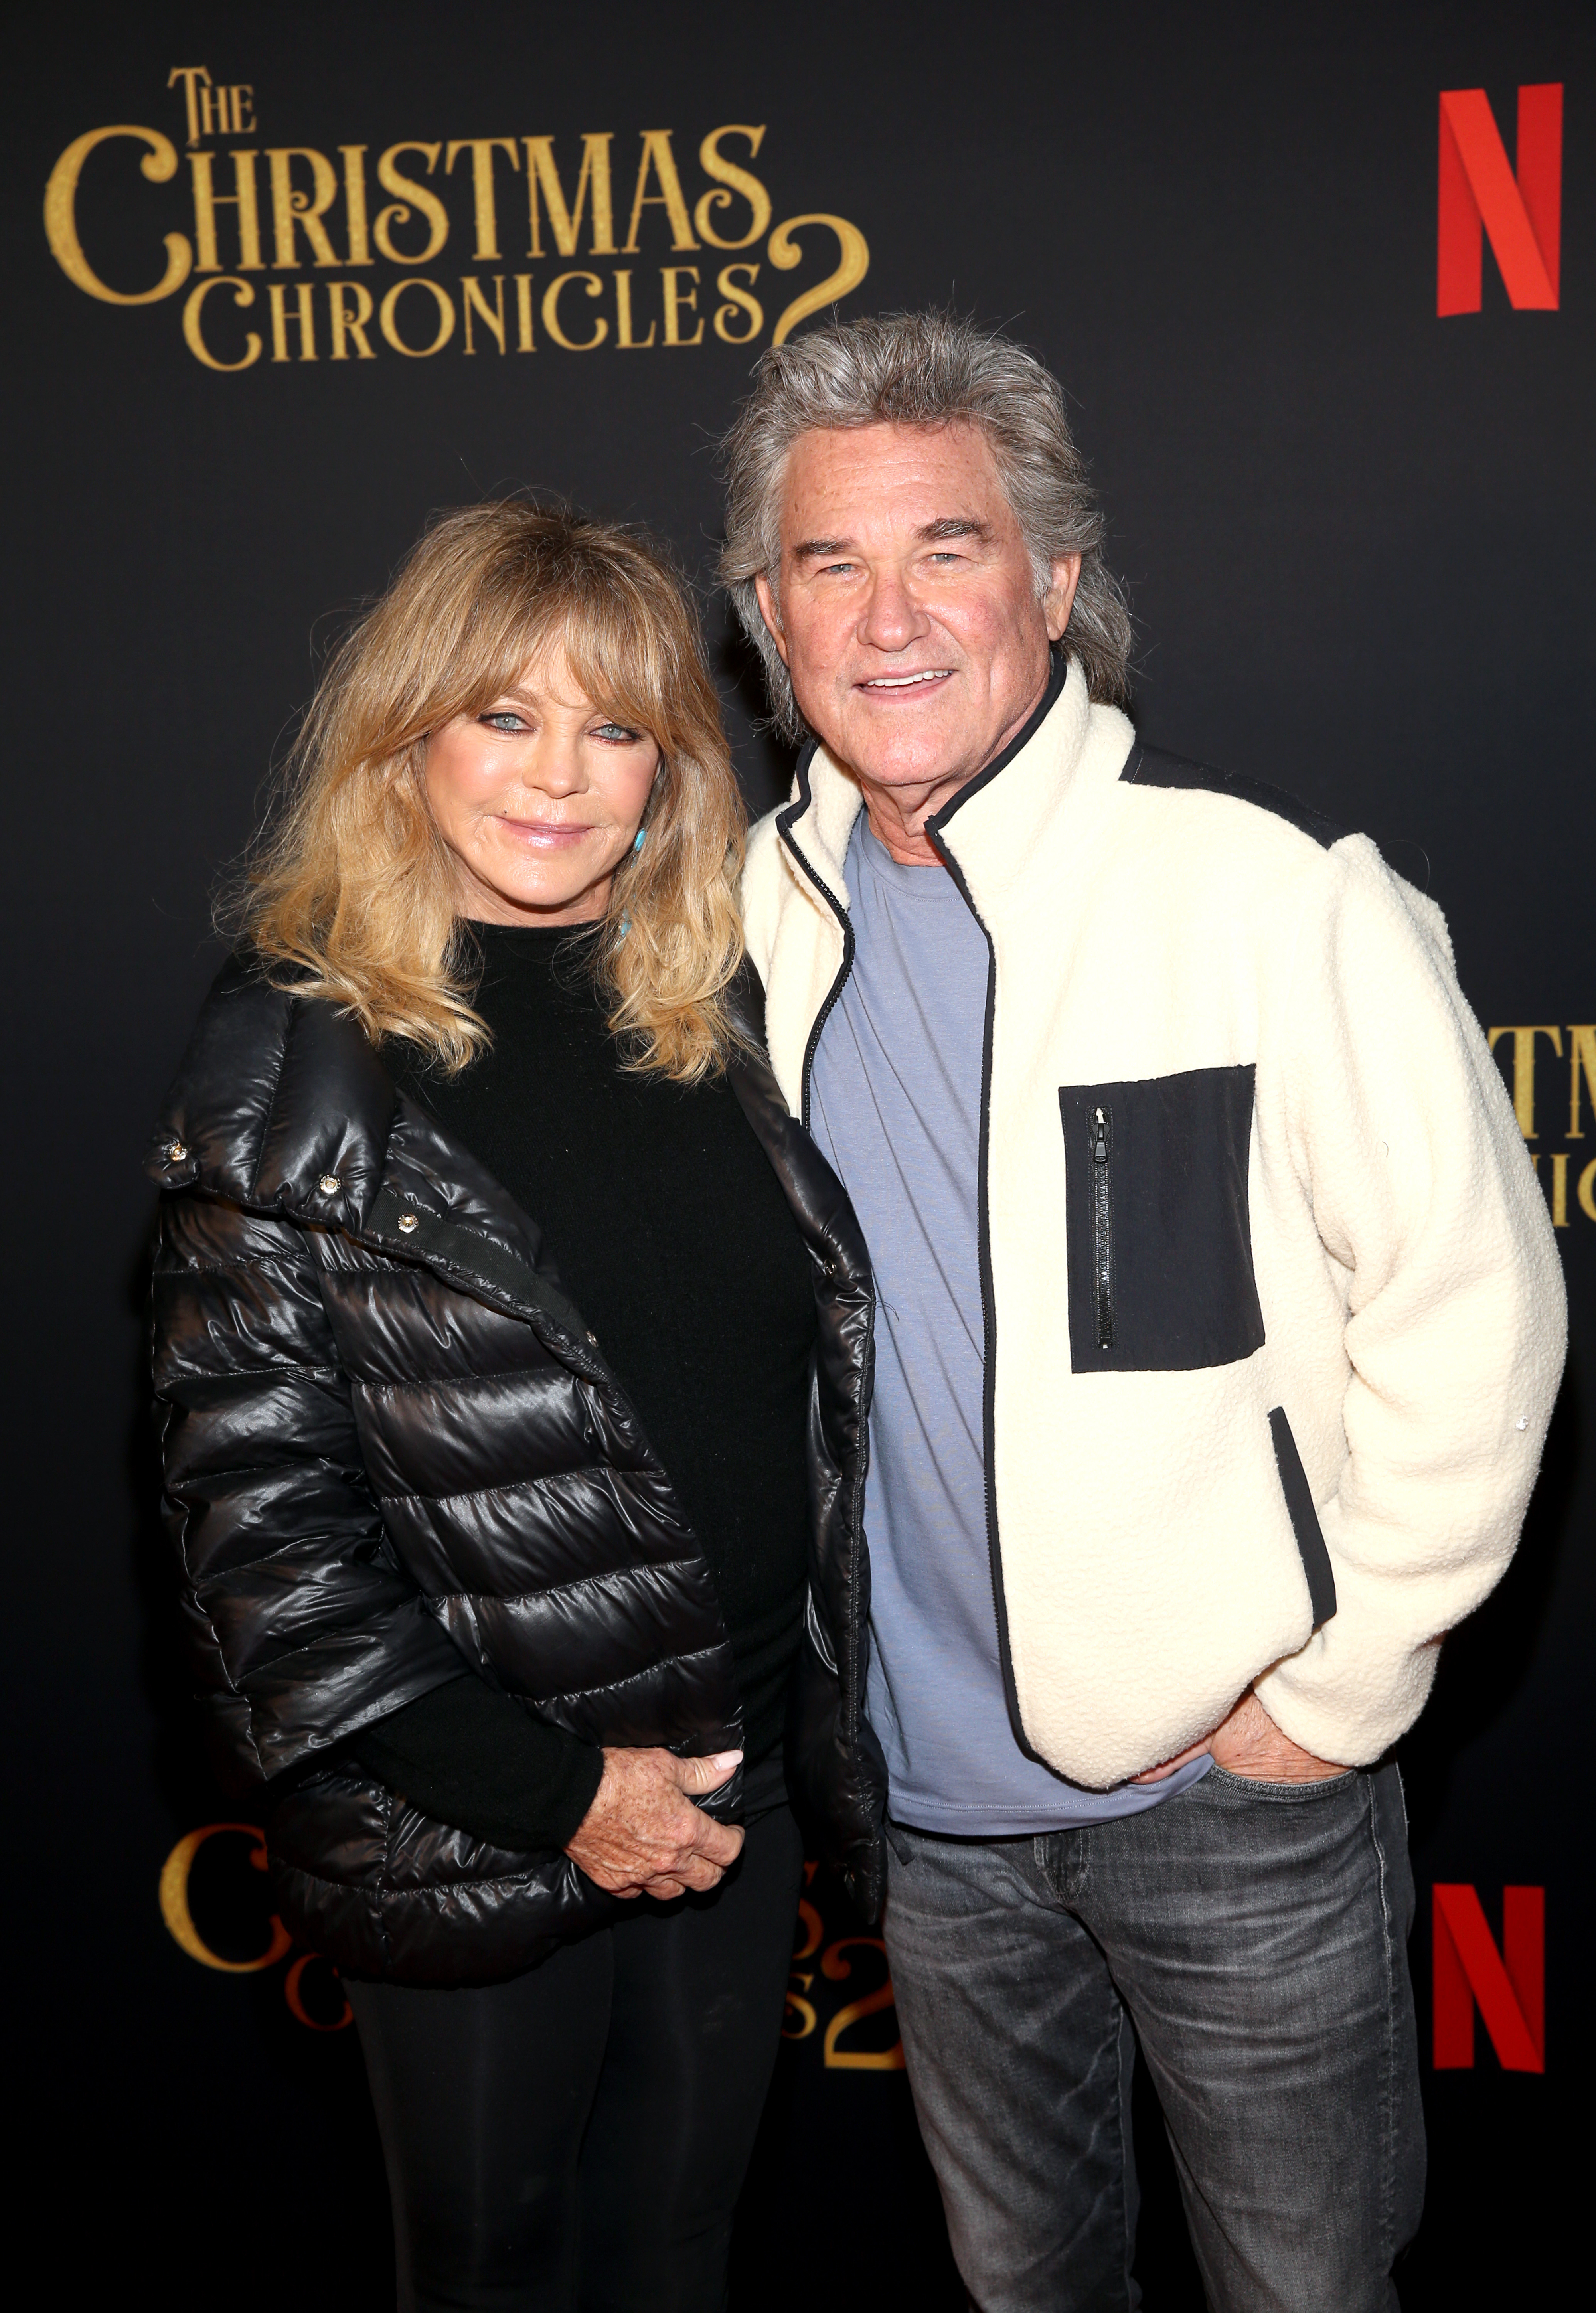 Two celebrities pose together; one in a black puffer jacket, the other in a cream jacket with a dark pocket detail